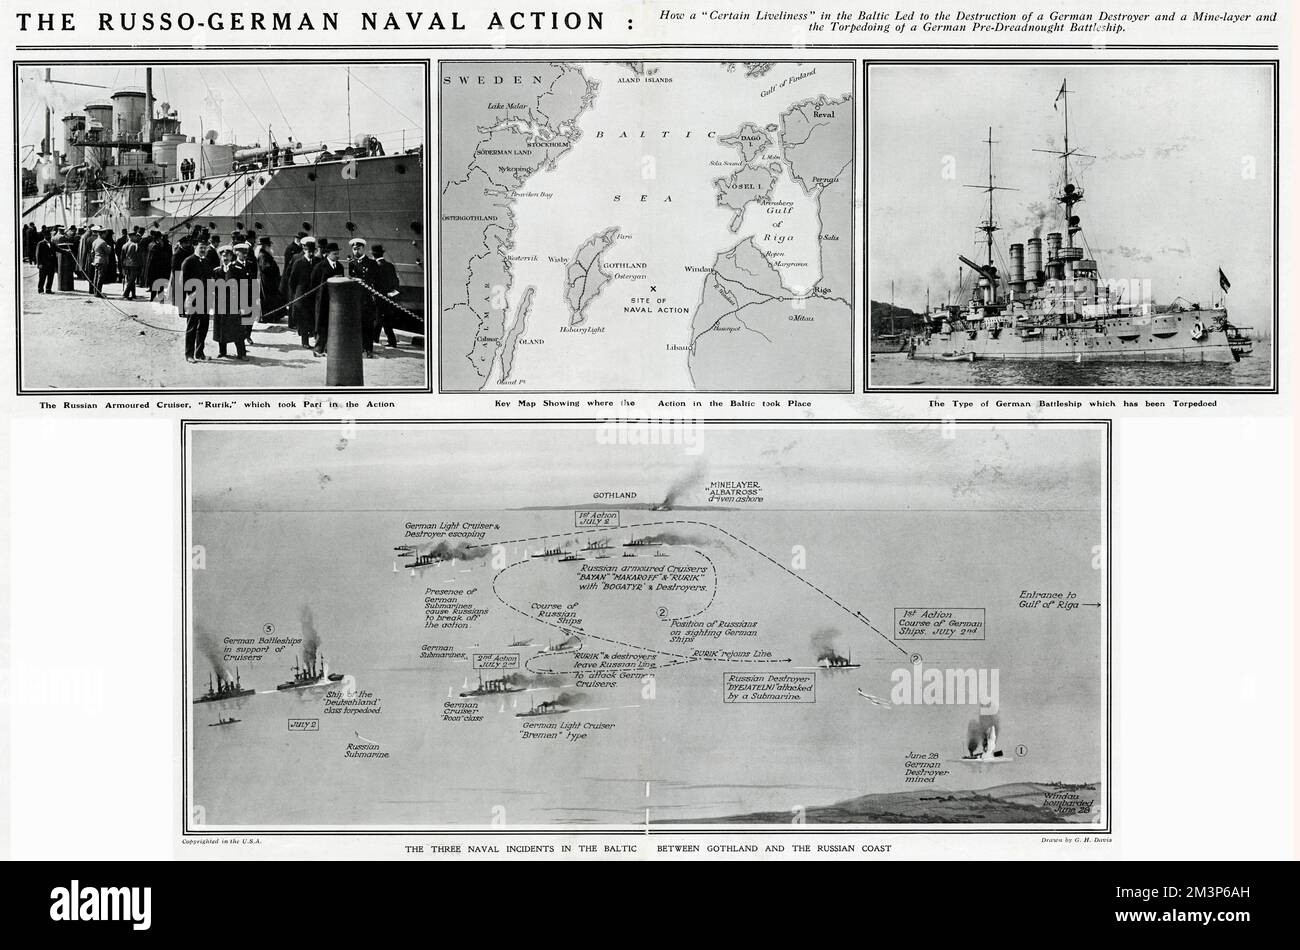 Russo-German naval action in the Baltic during the First World War which led to the destruction of a German destroyer and mine layer and the torpedoing of a German pre-dreadnought battleship.  Showing the Russian armoured cruiser Rurik which took part in the action, a key map showing where the action took place, the type of German battleship which was torpedoed, and a drawing of the three naval incidents in the Baltic between Gothland and the Russian coast.      Date: June-July 1915 Stock Photo